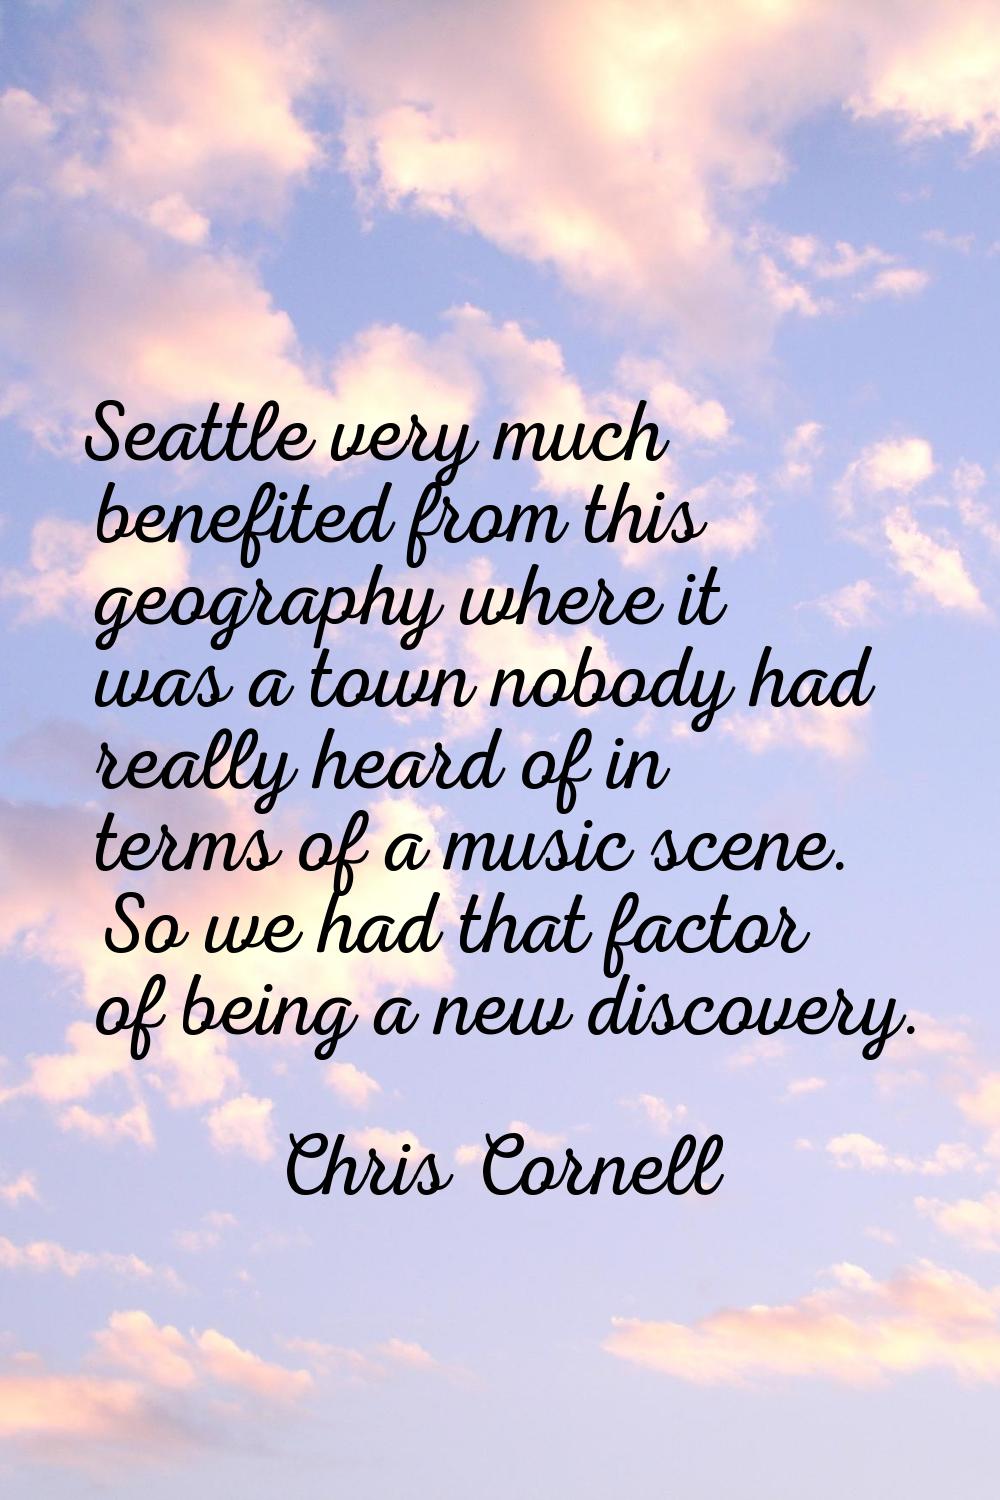 Seattle very much benefited from this geography where it was a town nobody had really heard of in t